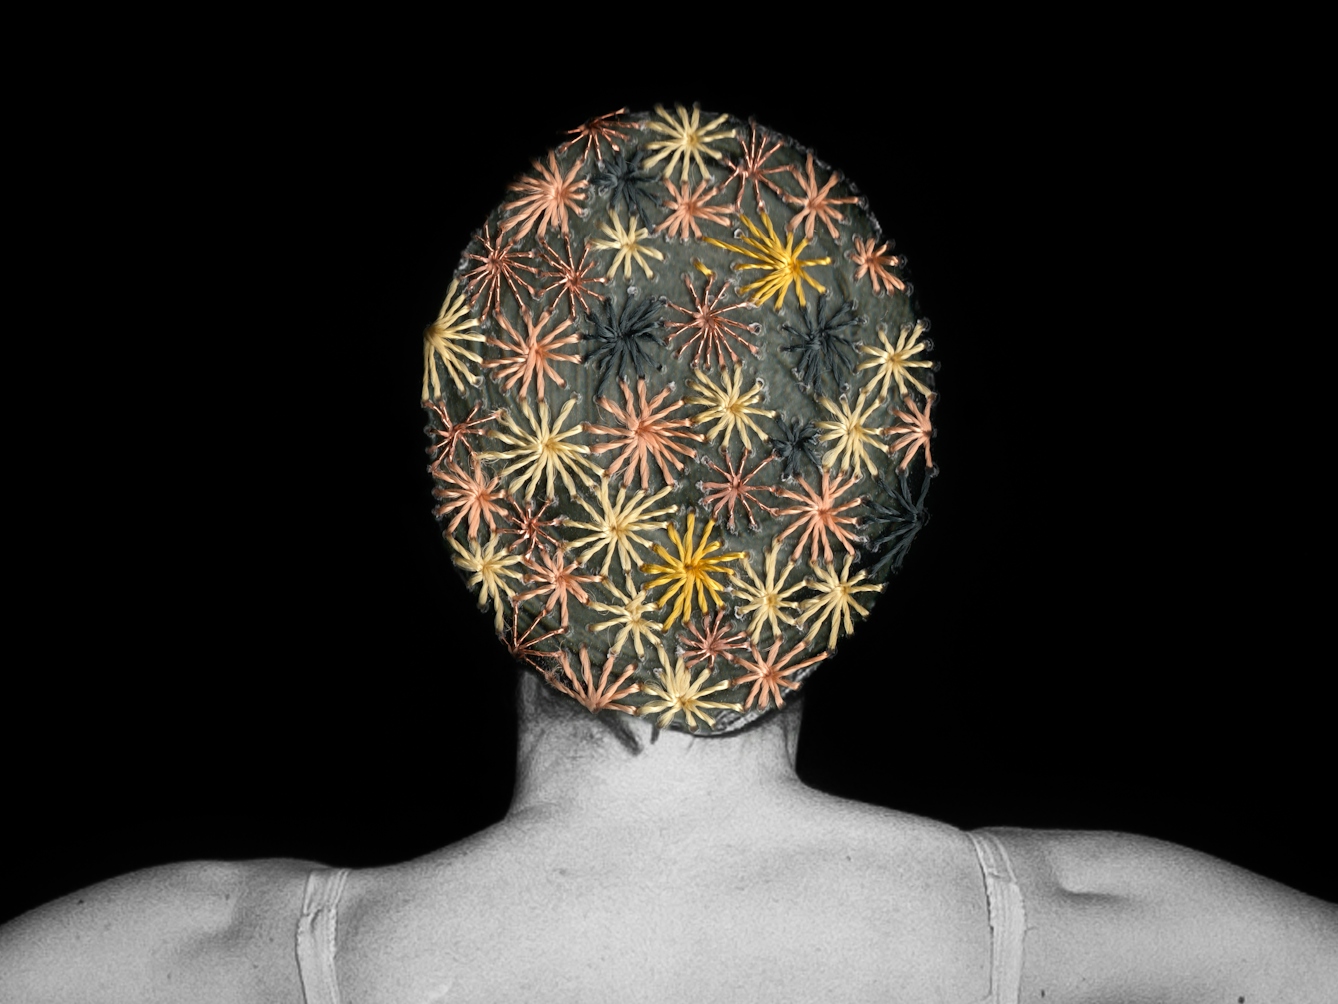 Artwork made up of a black and white photograph of a female figure from behind, from the waist up, against a black background. Embroidered into the photographic print with yellow and orange coloured thread is a crisscross floral pattern which exactly covers her head and hair.